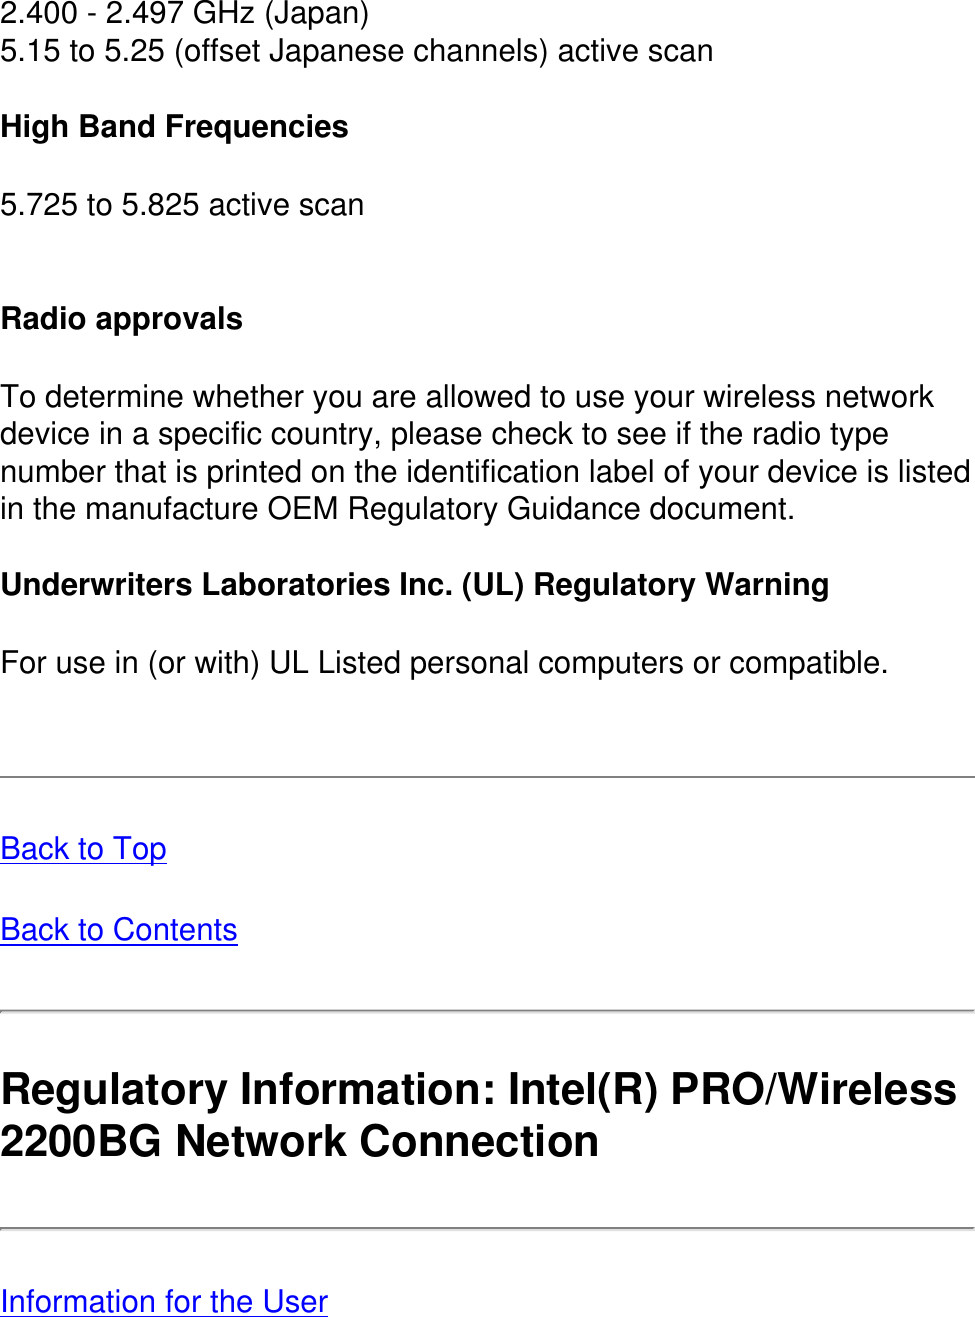 2.400 - 2.497 GHz (Japan)5.15 to 5.25 (offset Japanese channels) active scan High Band Frequencies5.725 to 5.825 active scan Radio approvalsTo determine whether you are allowed to use your wireless network device in a specific country, please check to see if the radio type number that is printed on the identification label of your device is listed in the manufacture OEM Regulatory Guidance document.Underwriters Laboratories Inc. (UL) Regulatory WarningFor use in (or with) UL Listed personal computers or compatible. Back to TopBack to ContentsRegulatory Information: Intel(R) PRO/Wireless 2200BG Network Connection Information for the User